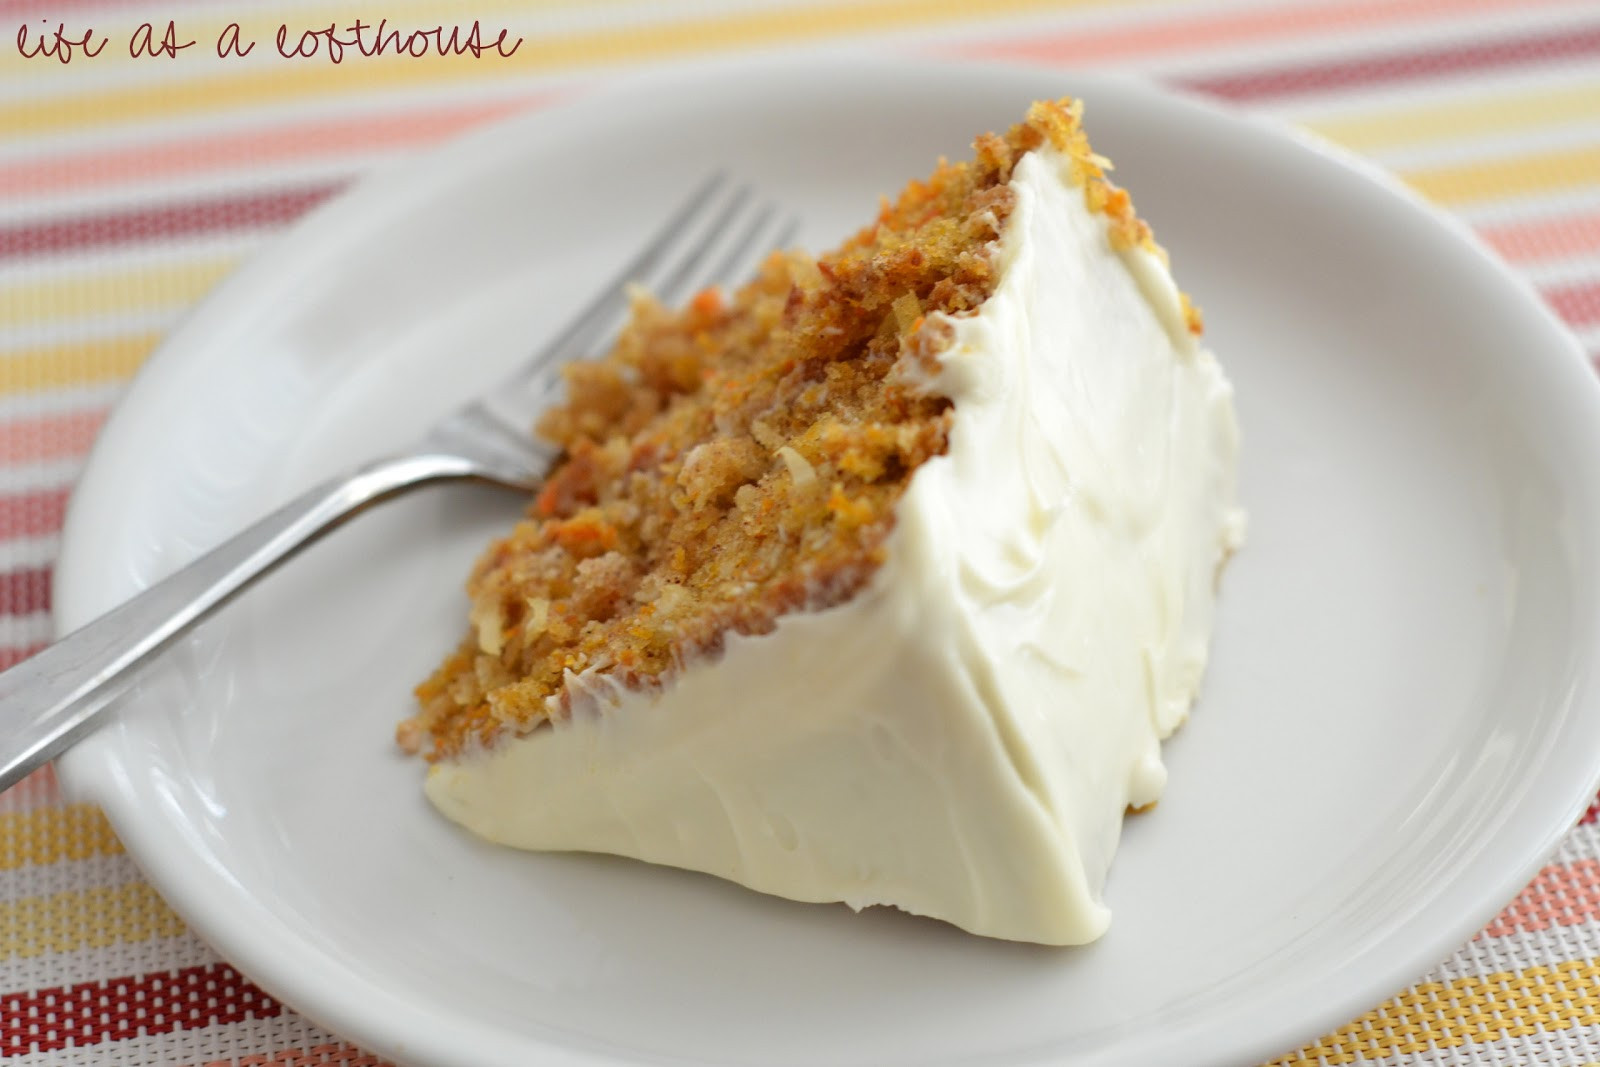 Best Carrot Cake
 The Best Carrot Cake with Cream Cheese Frosting